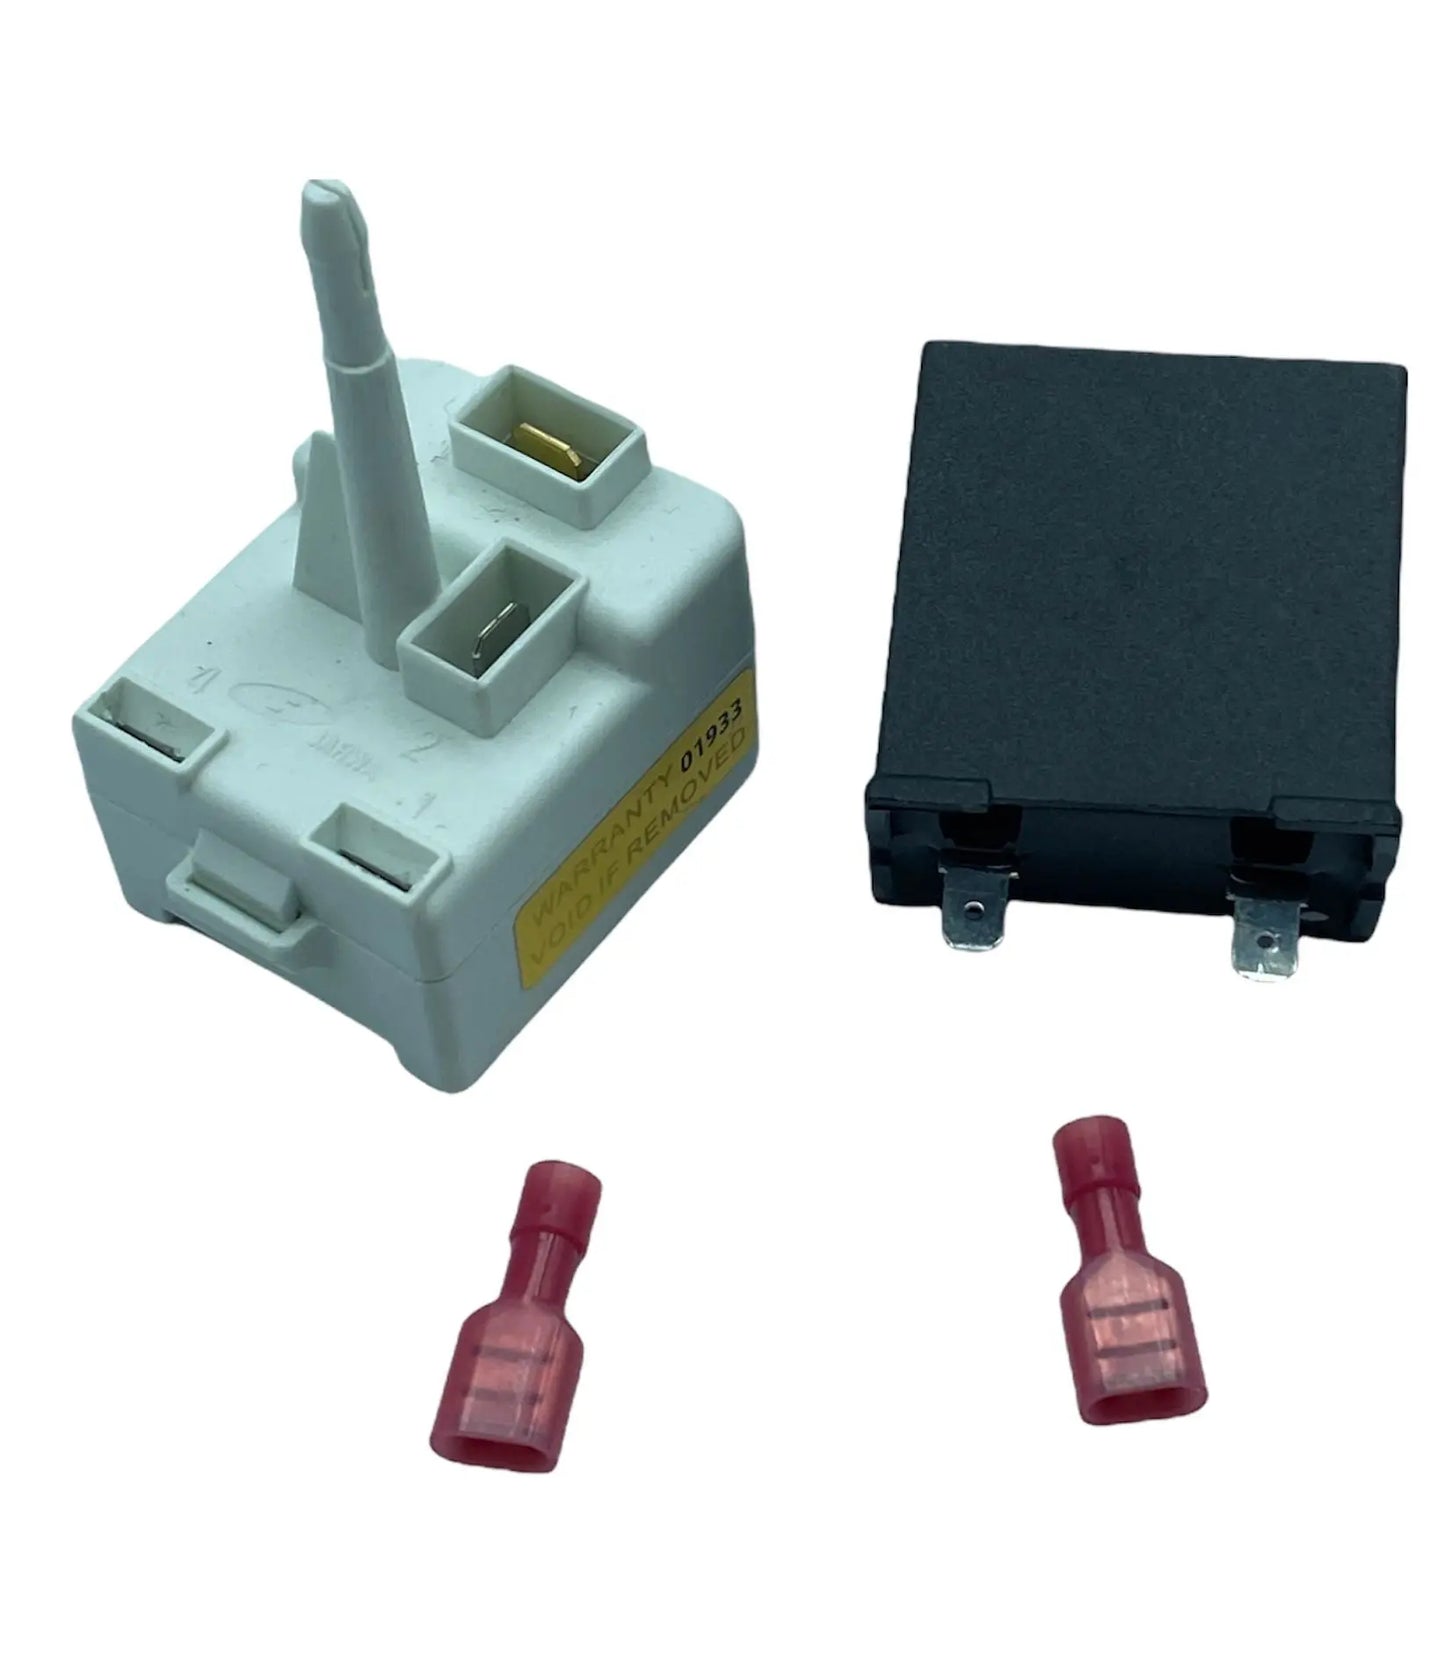 G.E Refrigerator Start Device Kit - WR01L03291 or WR09X10105 ,  REPLACES: WR08X10066  WR09X10081 1091666  EA963863  PS963863  AP3772846  PD00029698 INVERTEC